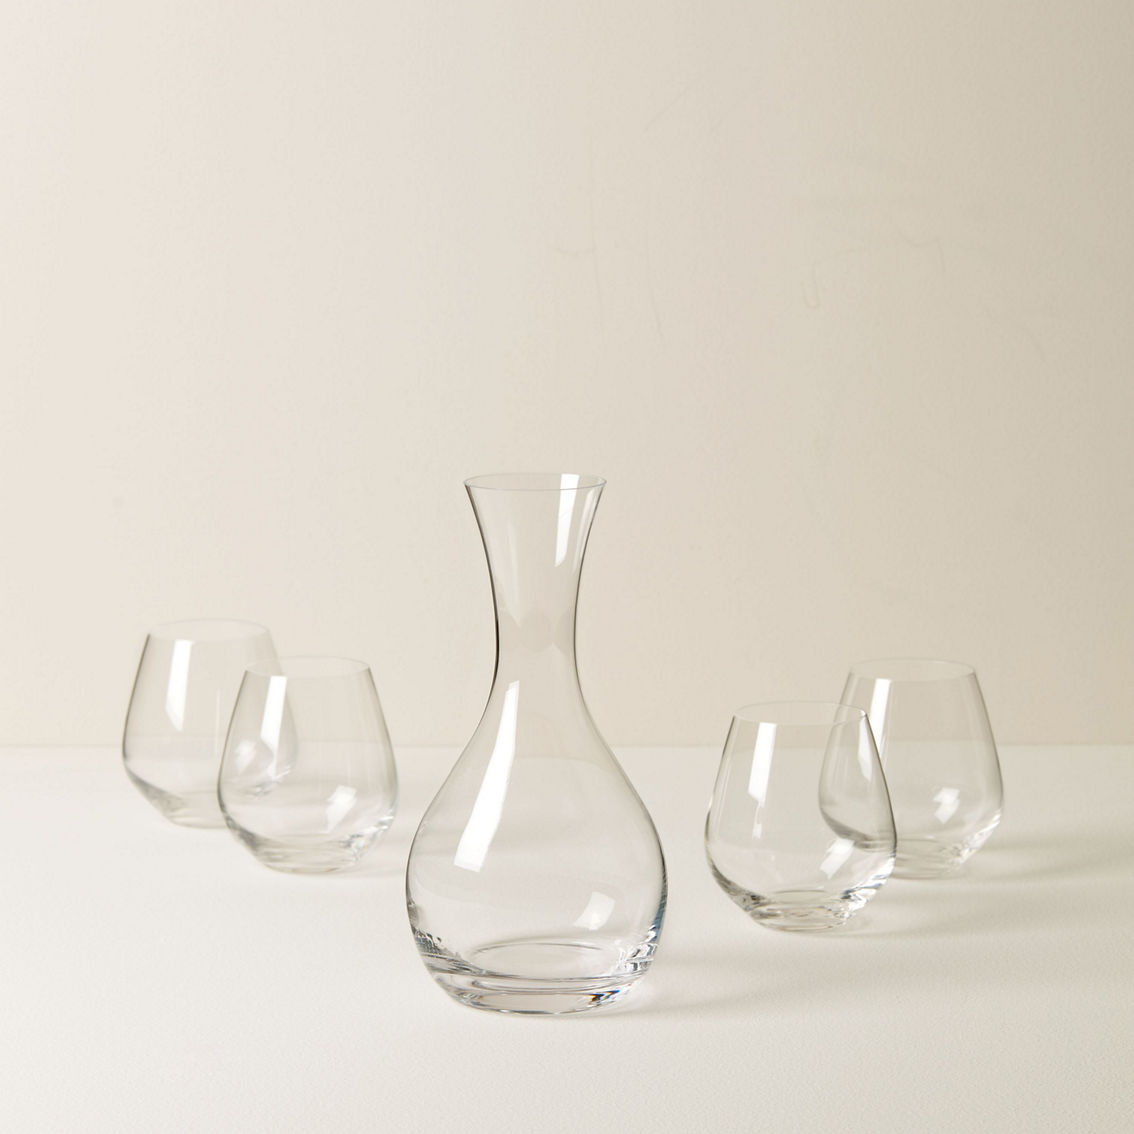 Lenox Tuscany Classics 5 pc. Decanter and Stemless Wine Glass Set - Image 3 of 3